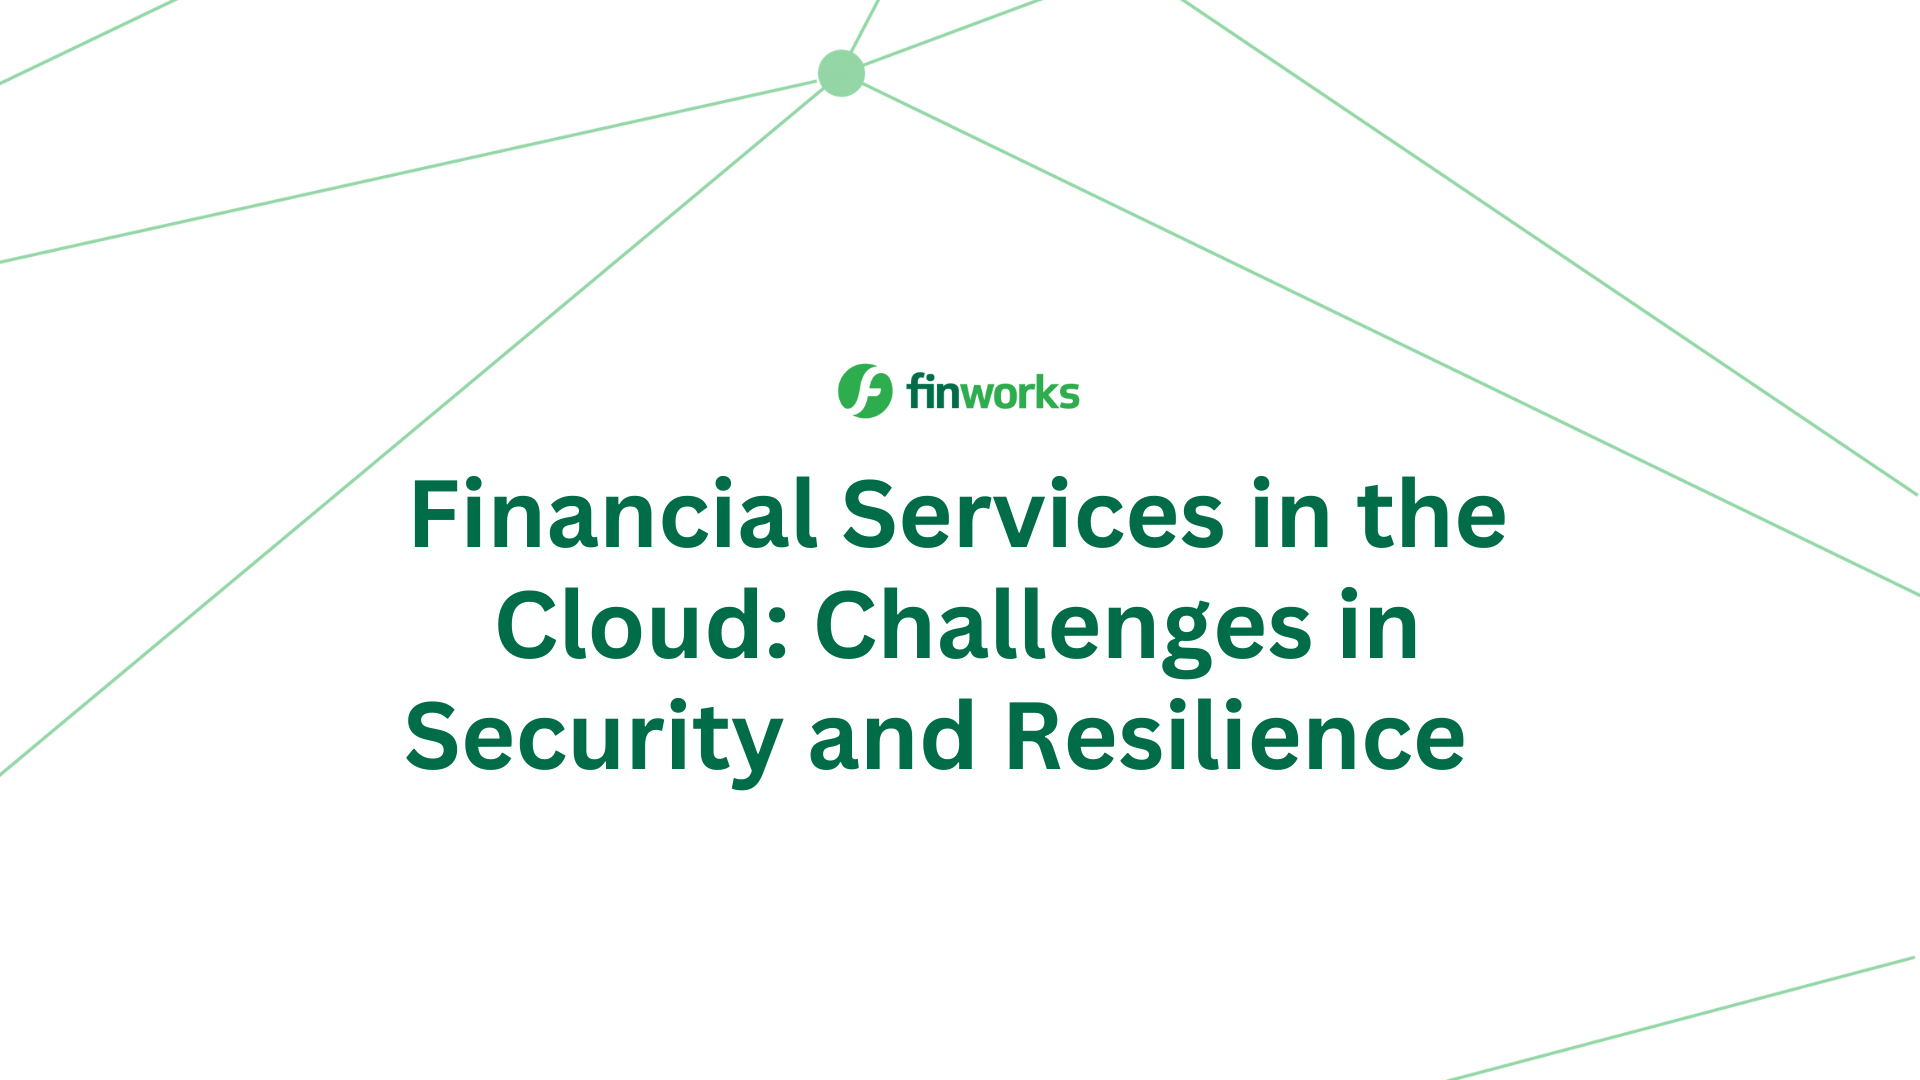 Financial Services in the Cloud: Challenges in Security and Resilience